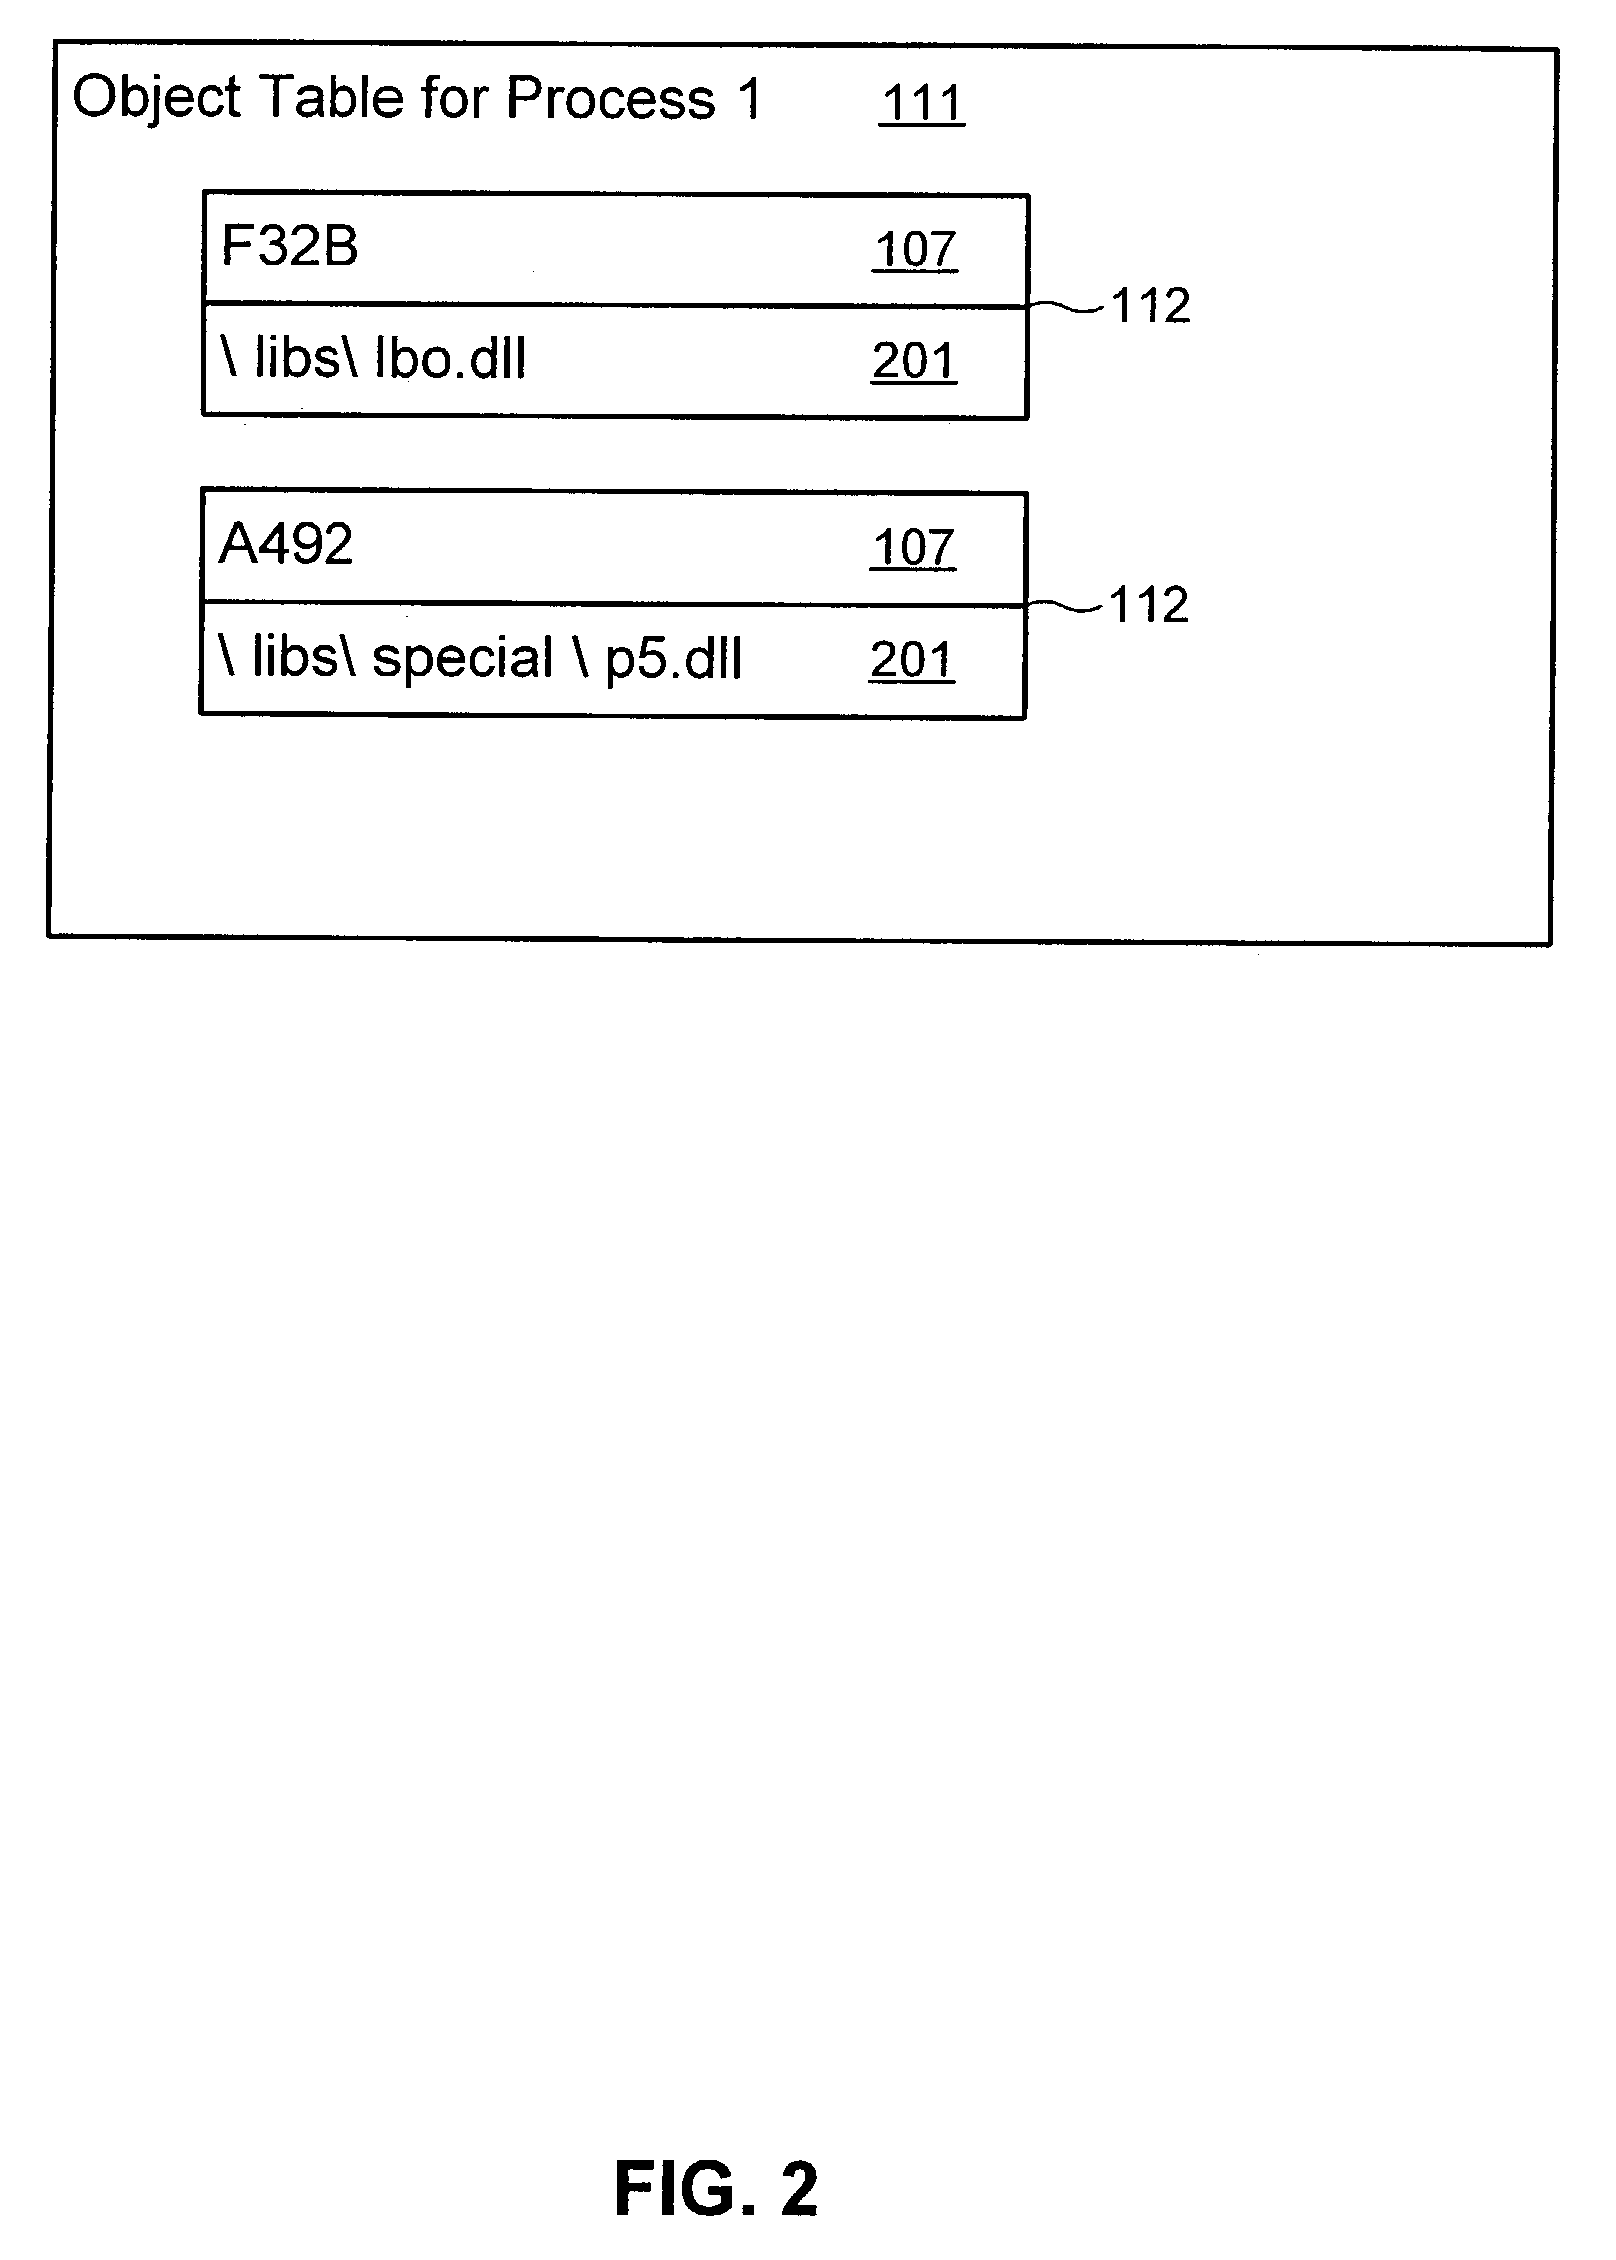 Supporting multiple late binding objects with the same identifier